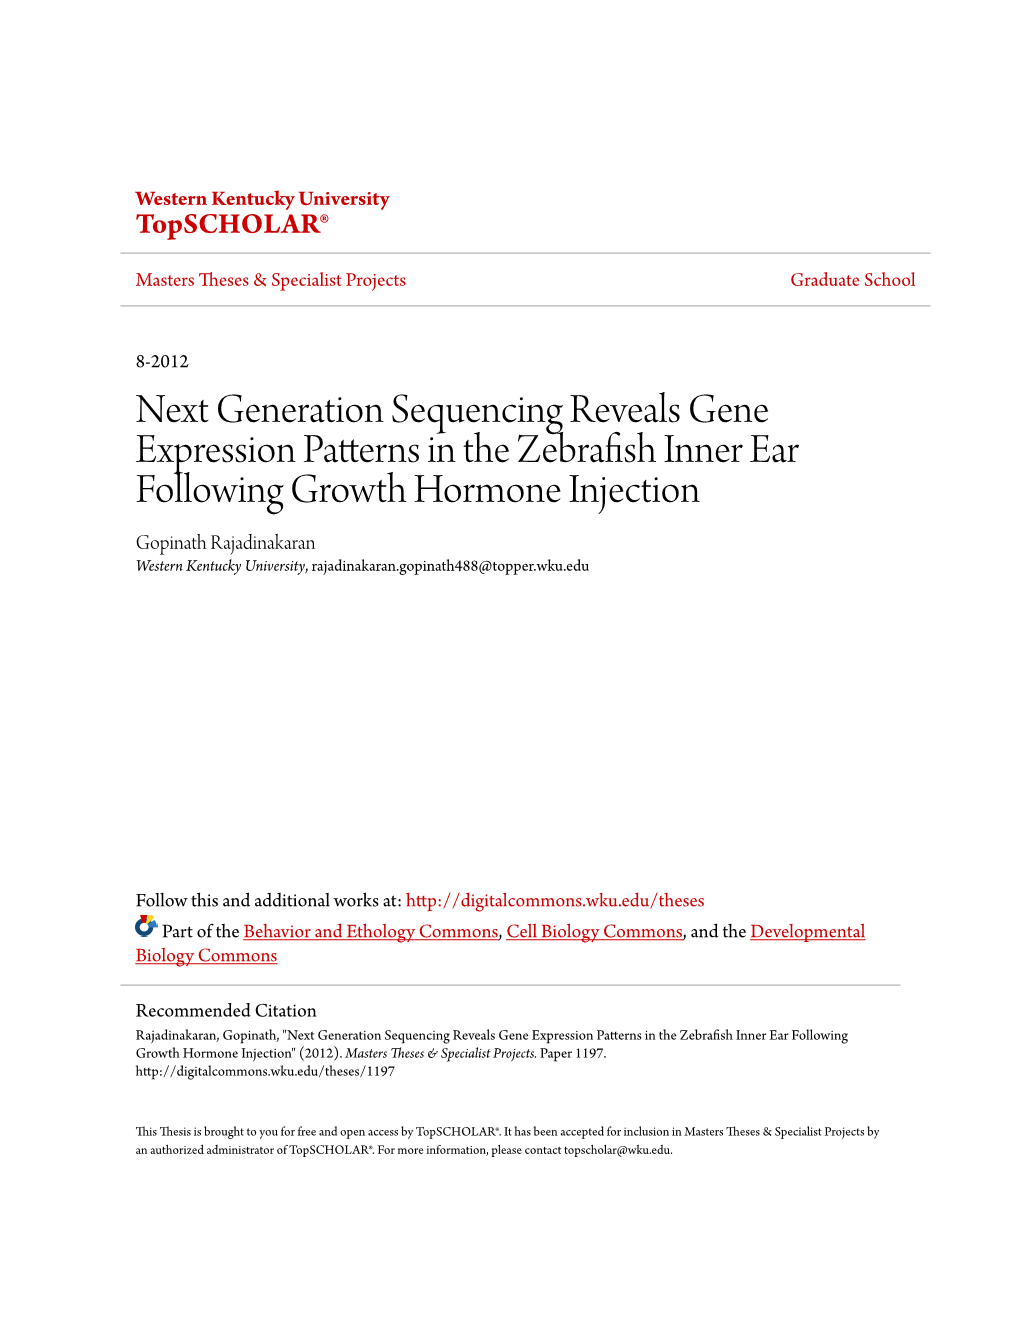 Next Generation Sequencing Reveals Gene Expression Patterns in The